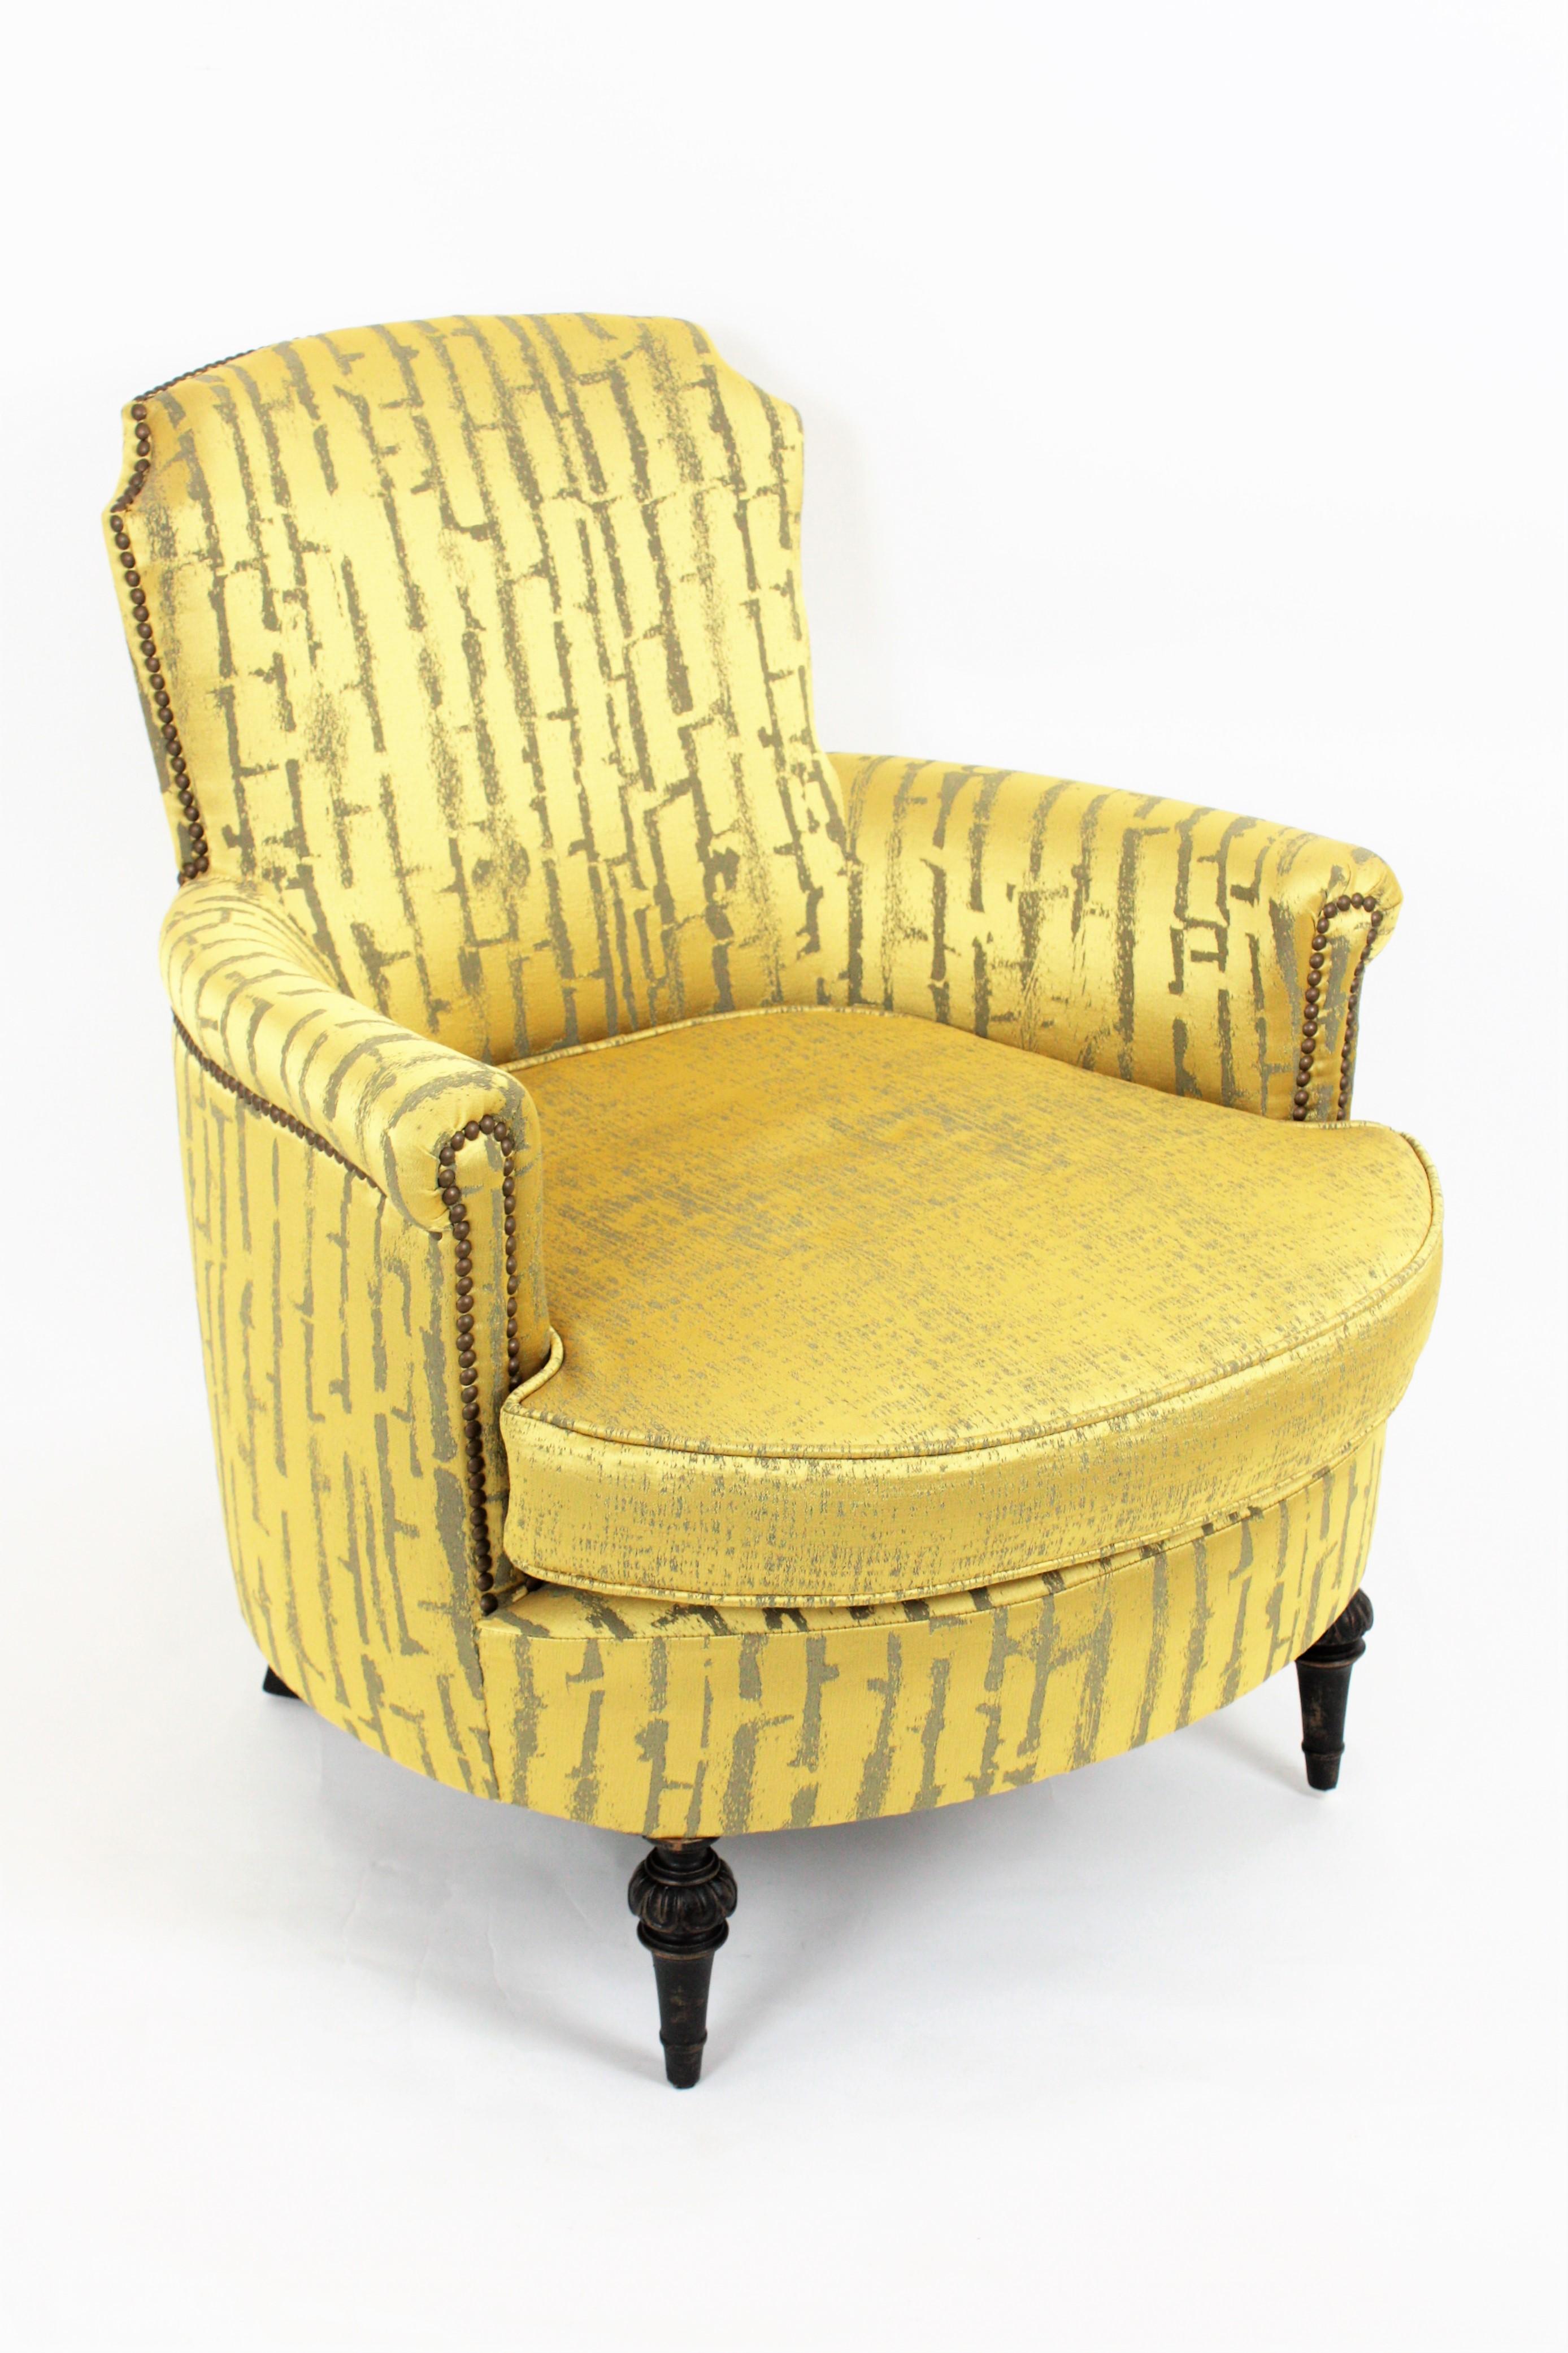 Elegant and comfortable Louis XVI Gustavian armchair with ebonized wood legs upholstered in Damask modern fabric. It has been professionally upholstered including seat, arms and back with new padding and it is covered with gold-lime green Damask